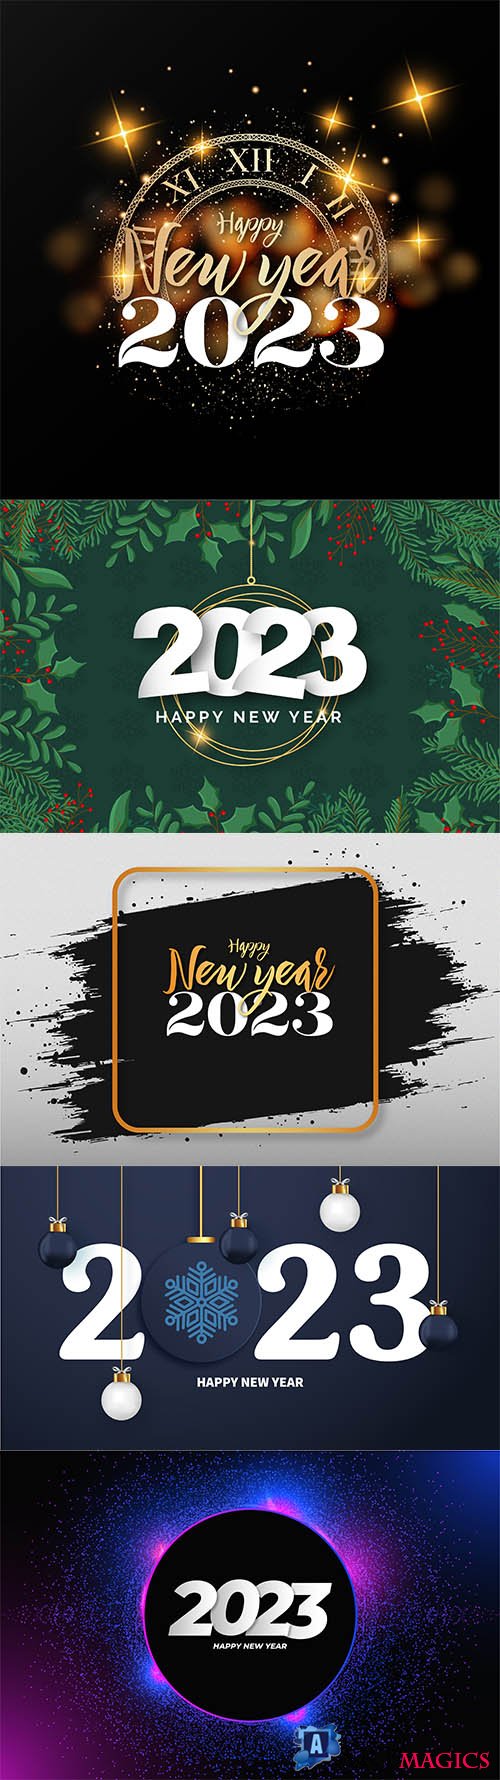 2023 New Year, abstract holiday design on vector background